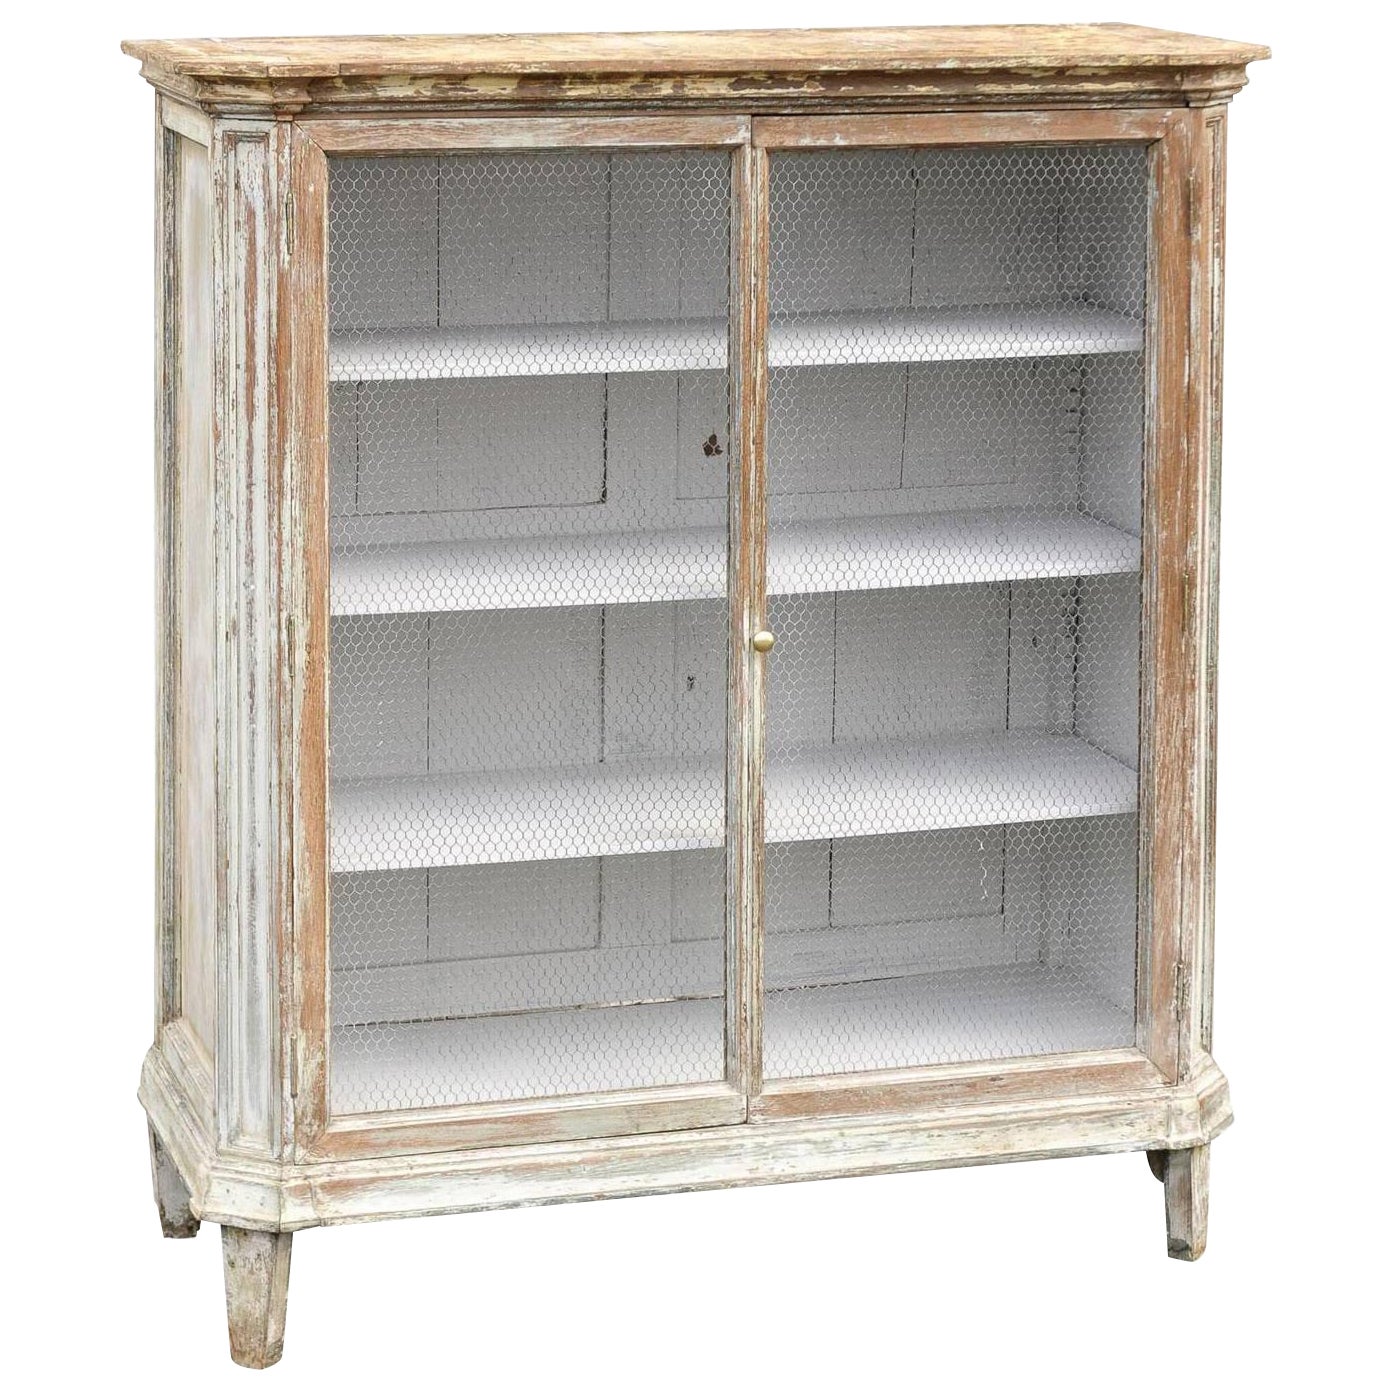 French Mid-19th Century Painted Cabinet with Chicken Wire Doors For Sale